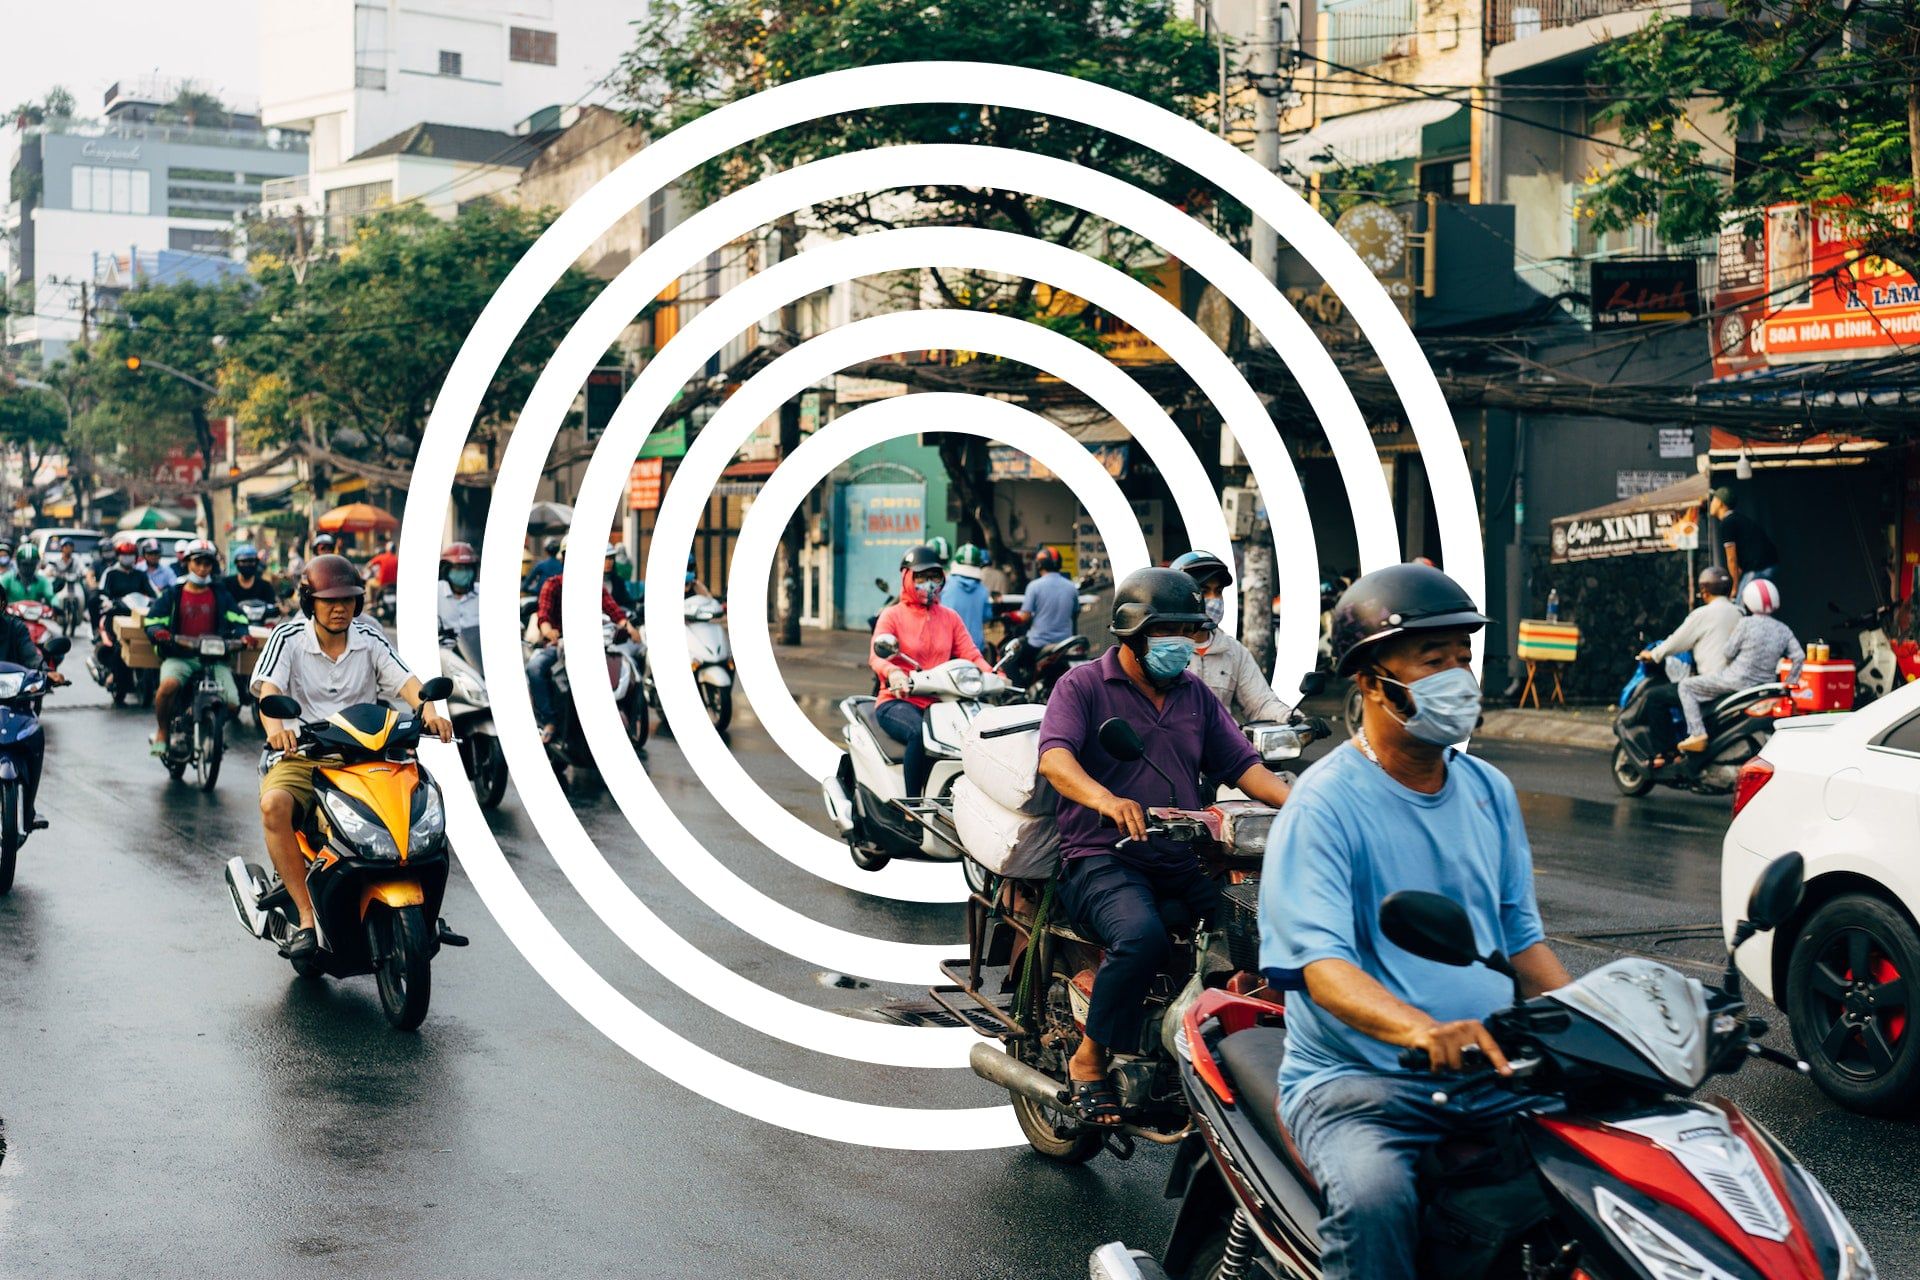 This is an image of people on motorbikes in Vietnam with a circular graphical element zooming in on one driver